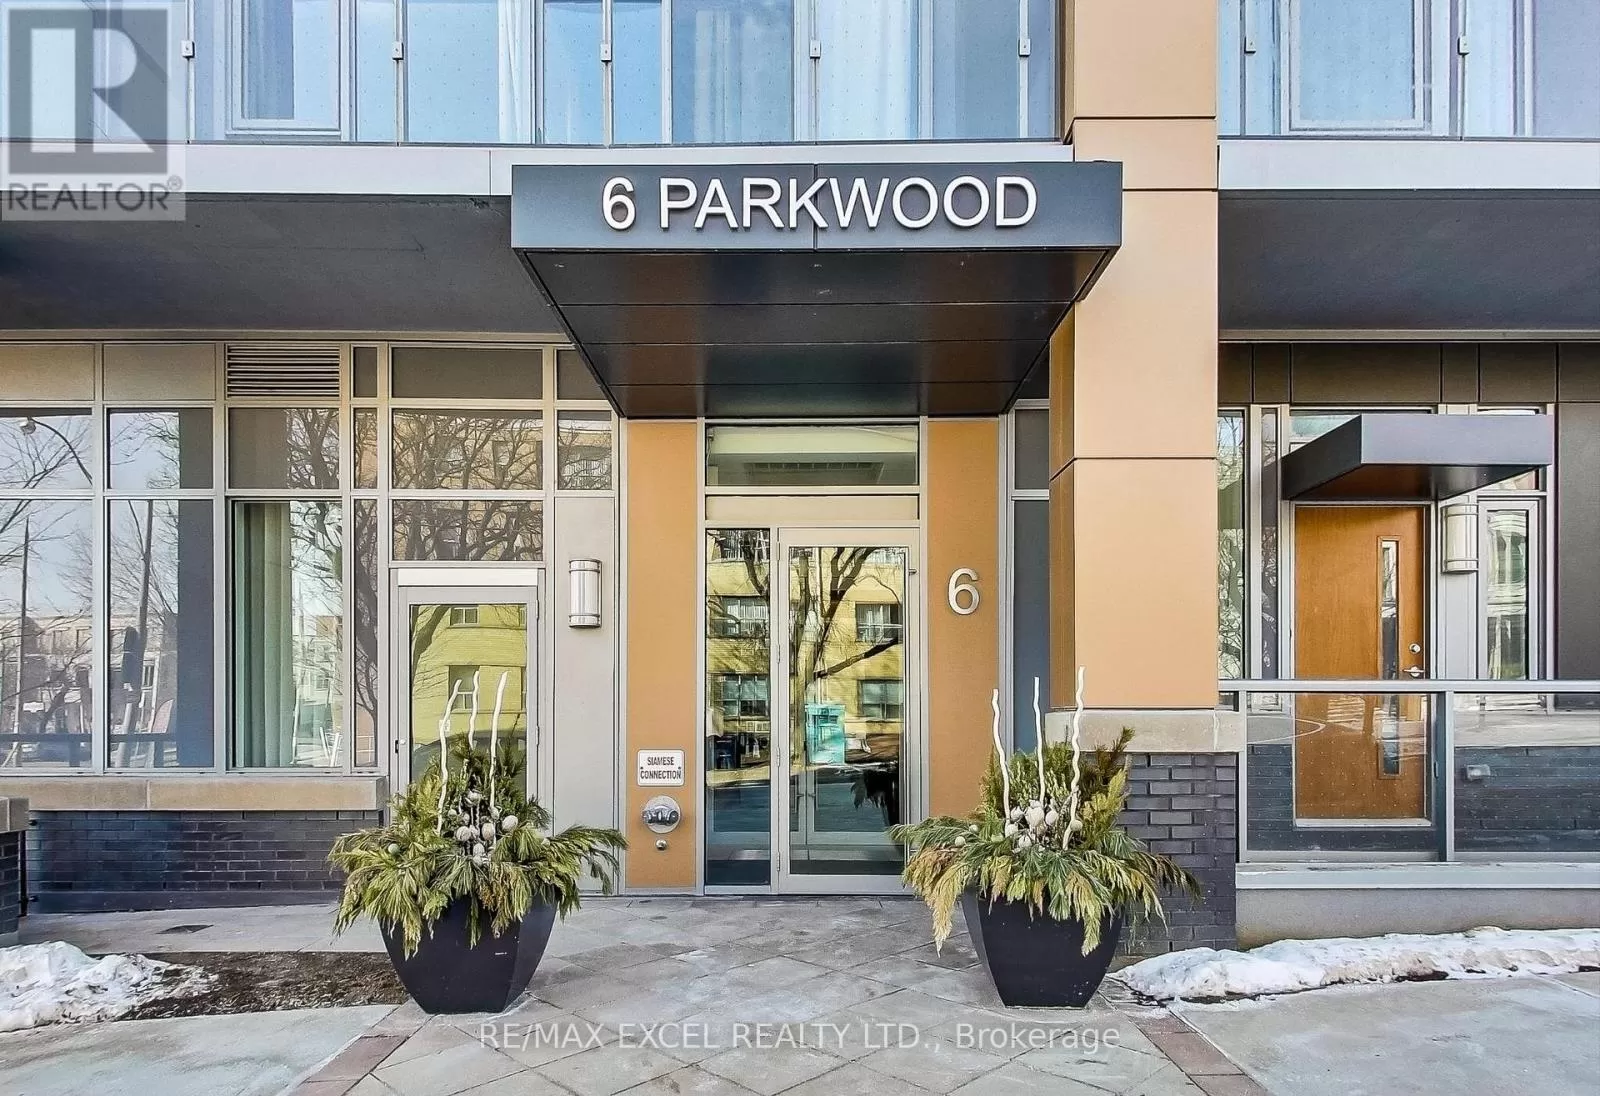 Apartment for rent: #706 -6 Parkwood Ave, Toronto, Ontario M4V 2W8